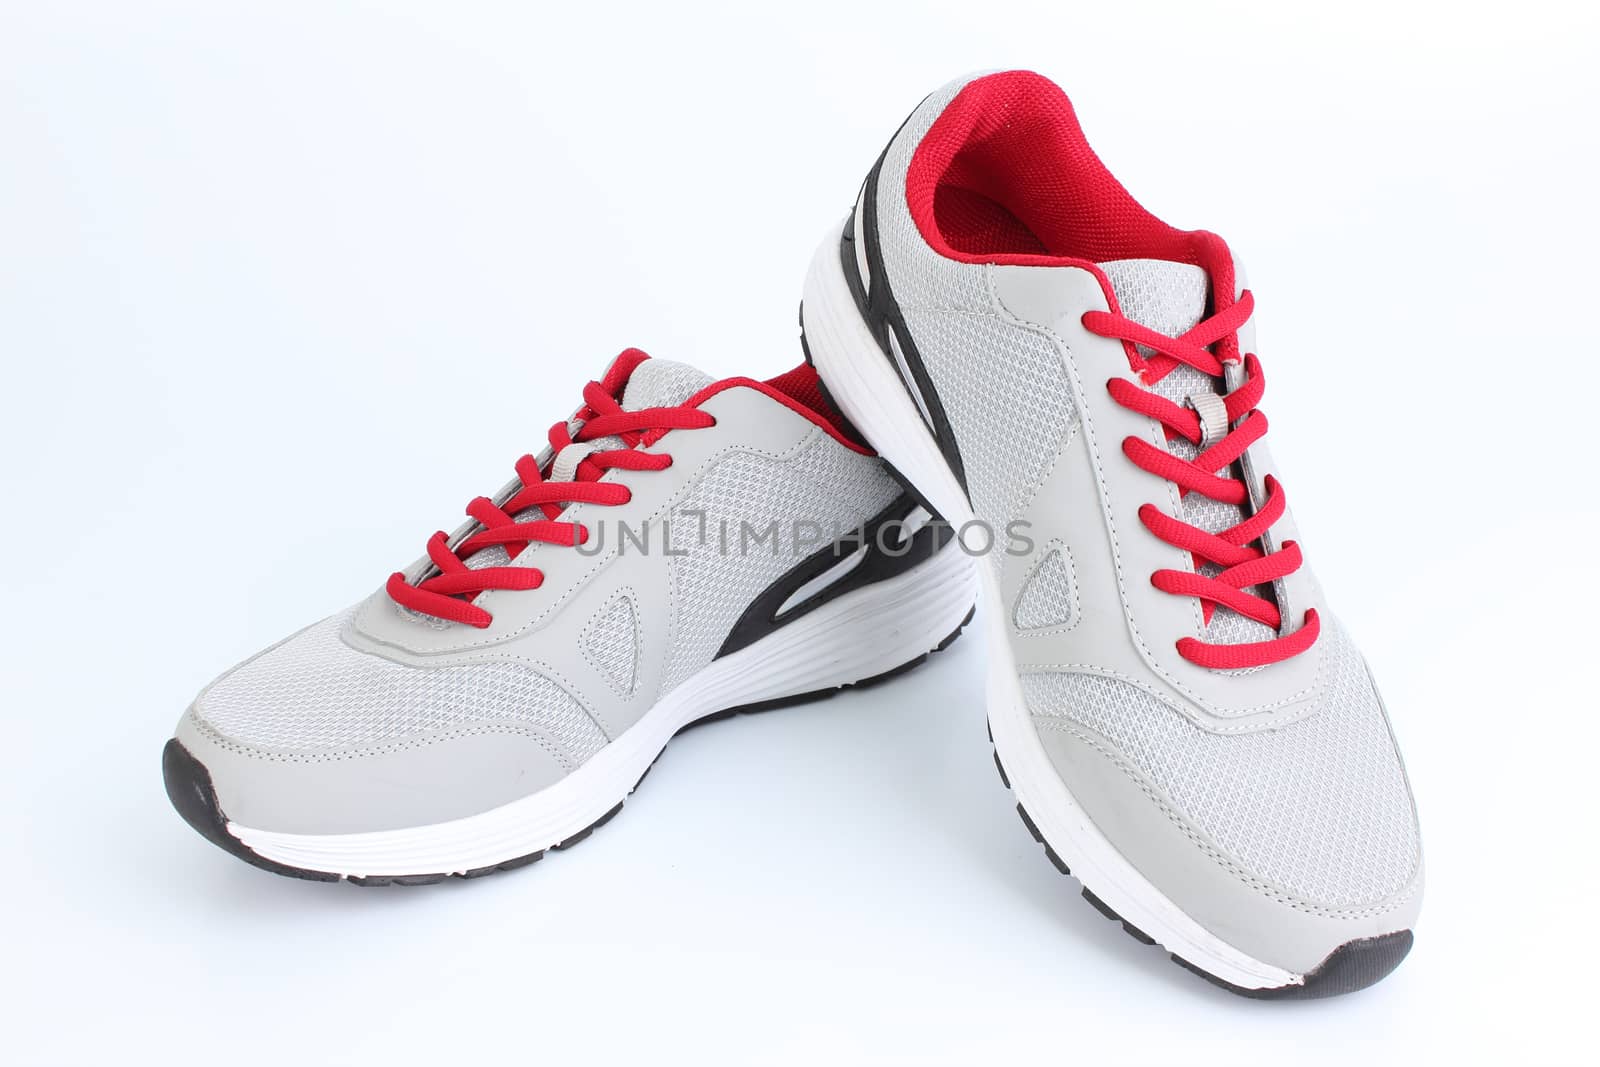 Gray sneakers with red laces on a white background by Mizkit